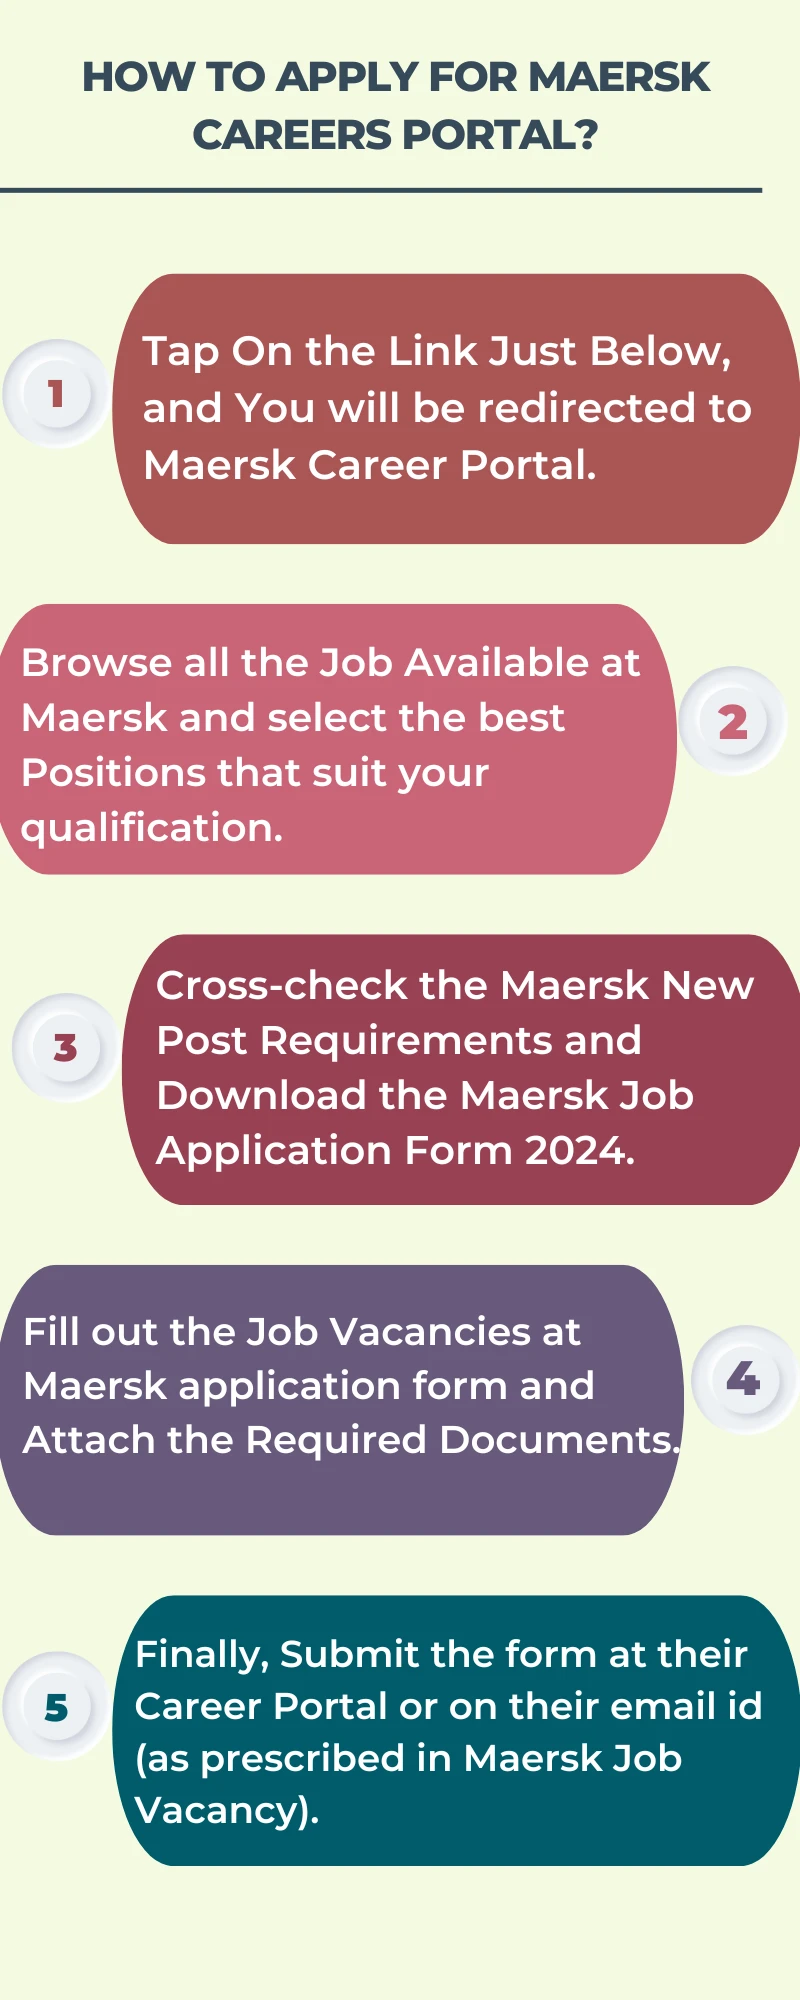 How To Apply for Maersk Careers Portal?